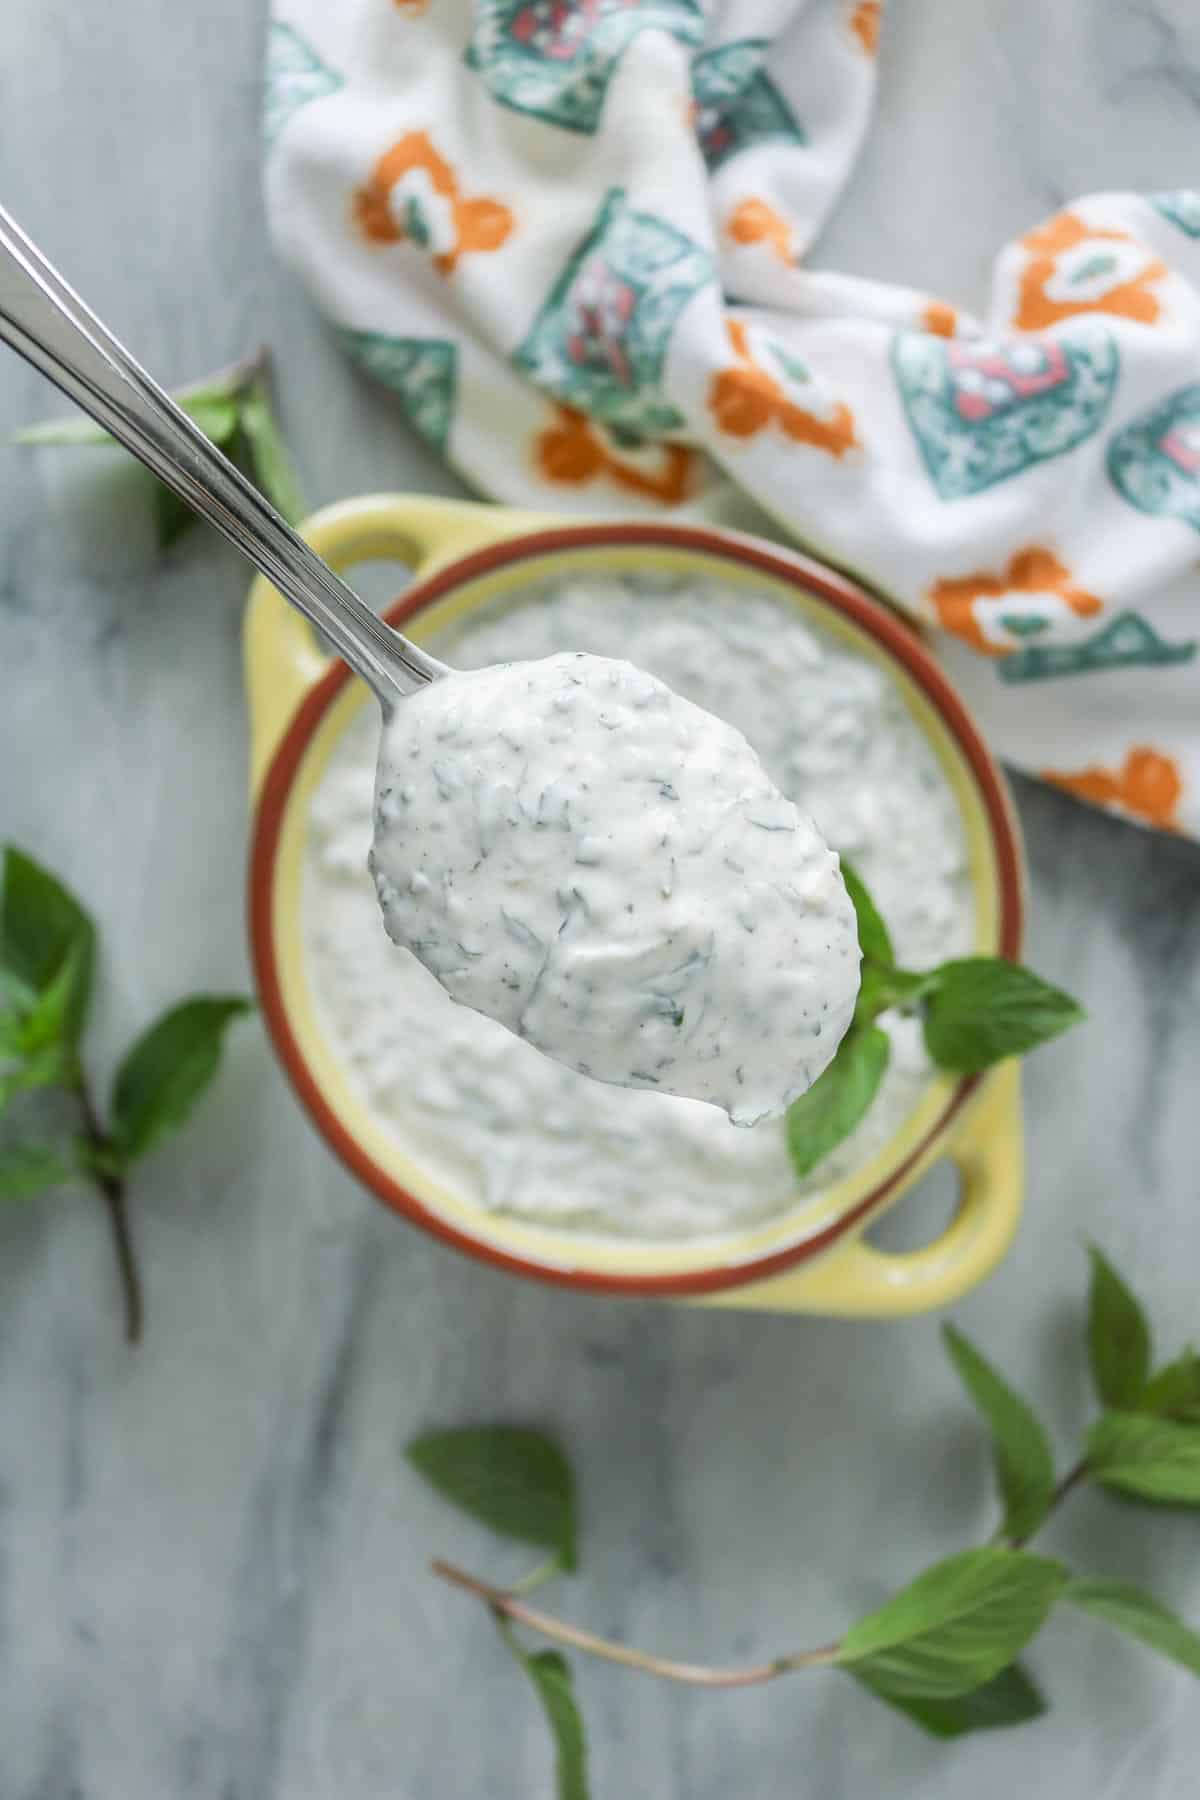 Spoonful of mint yogurt sauce from a bowl.